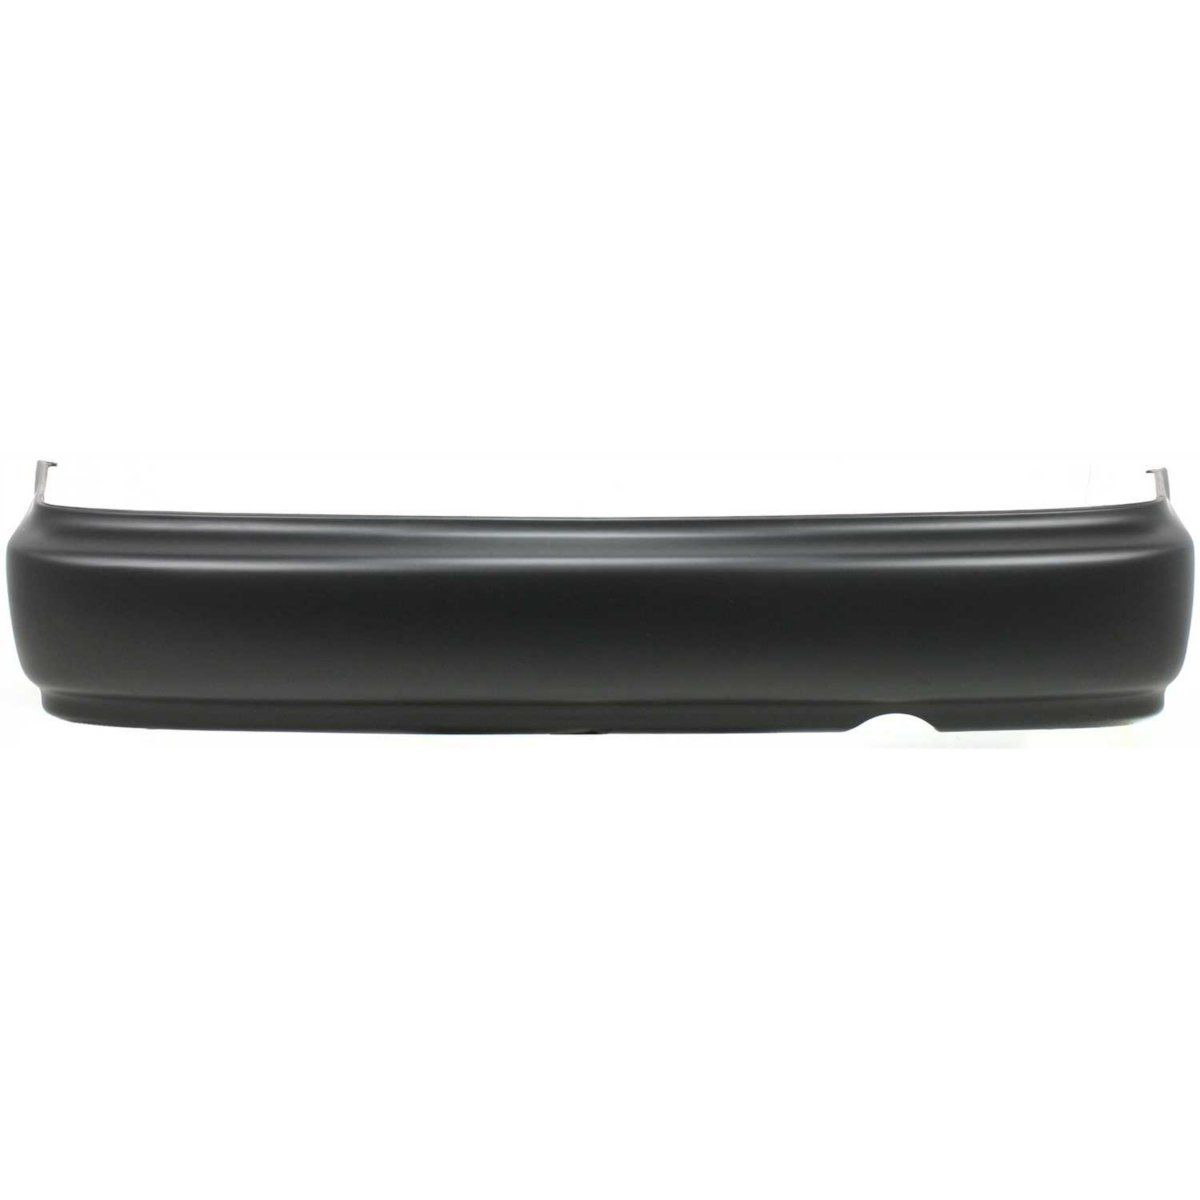 1996-1998 HONDA CIVIC Rear Bumper Cover 2dr coupe/4dr sedan  USA/Canada built Painted to Match